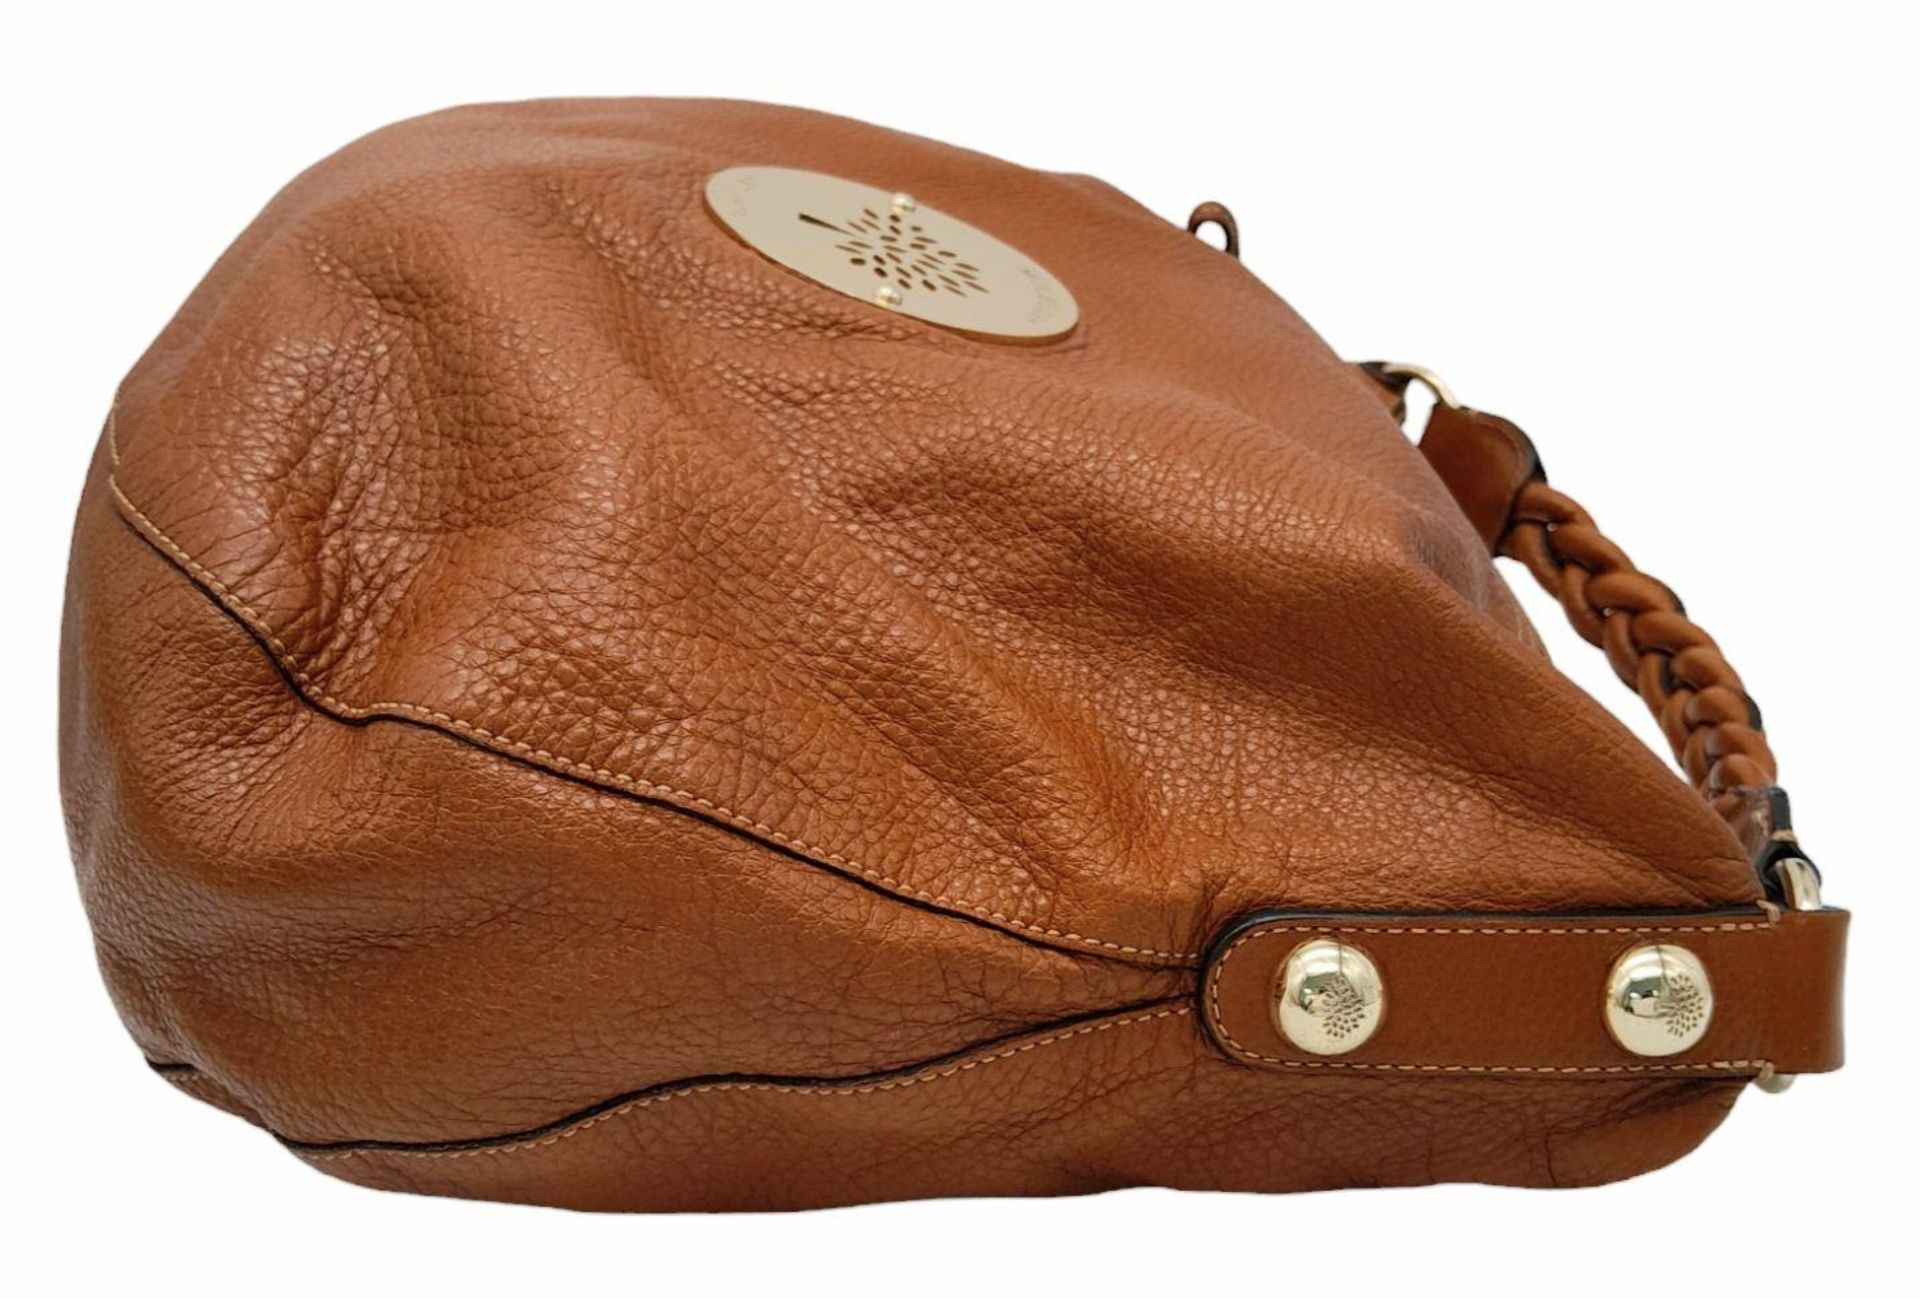 A Mulberry Tan Daria Hobo Bag. Leather exterior with gold-toned hardware, braided strap and zip - Bild 4 aus 8